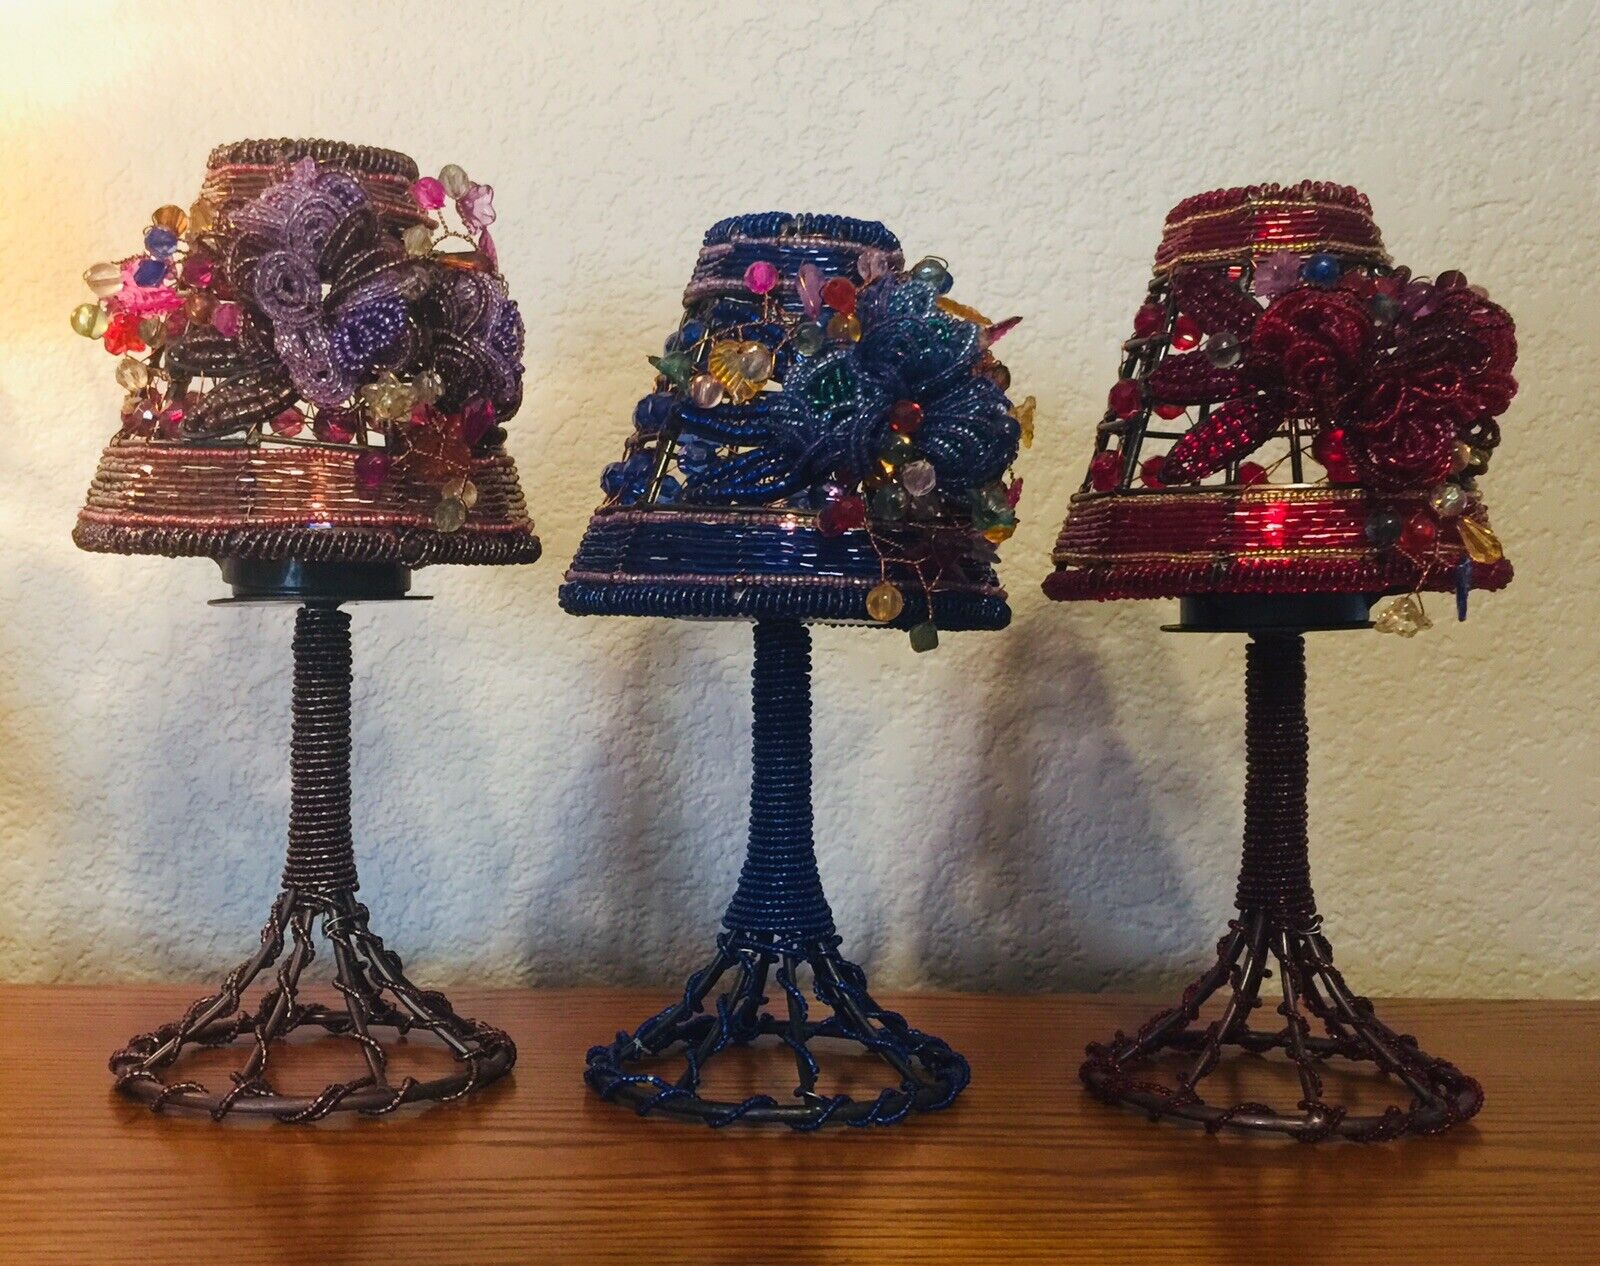 3 Colorful Beaded Tea Light Lamps 1 of each Color, BLUE, PURPLE, RED-U GET ALL 3